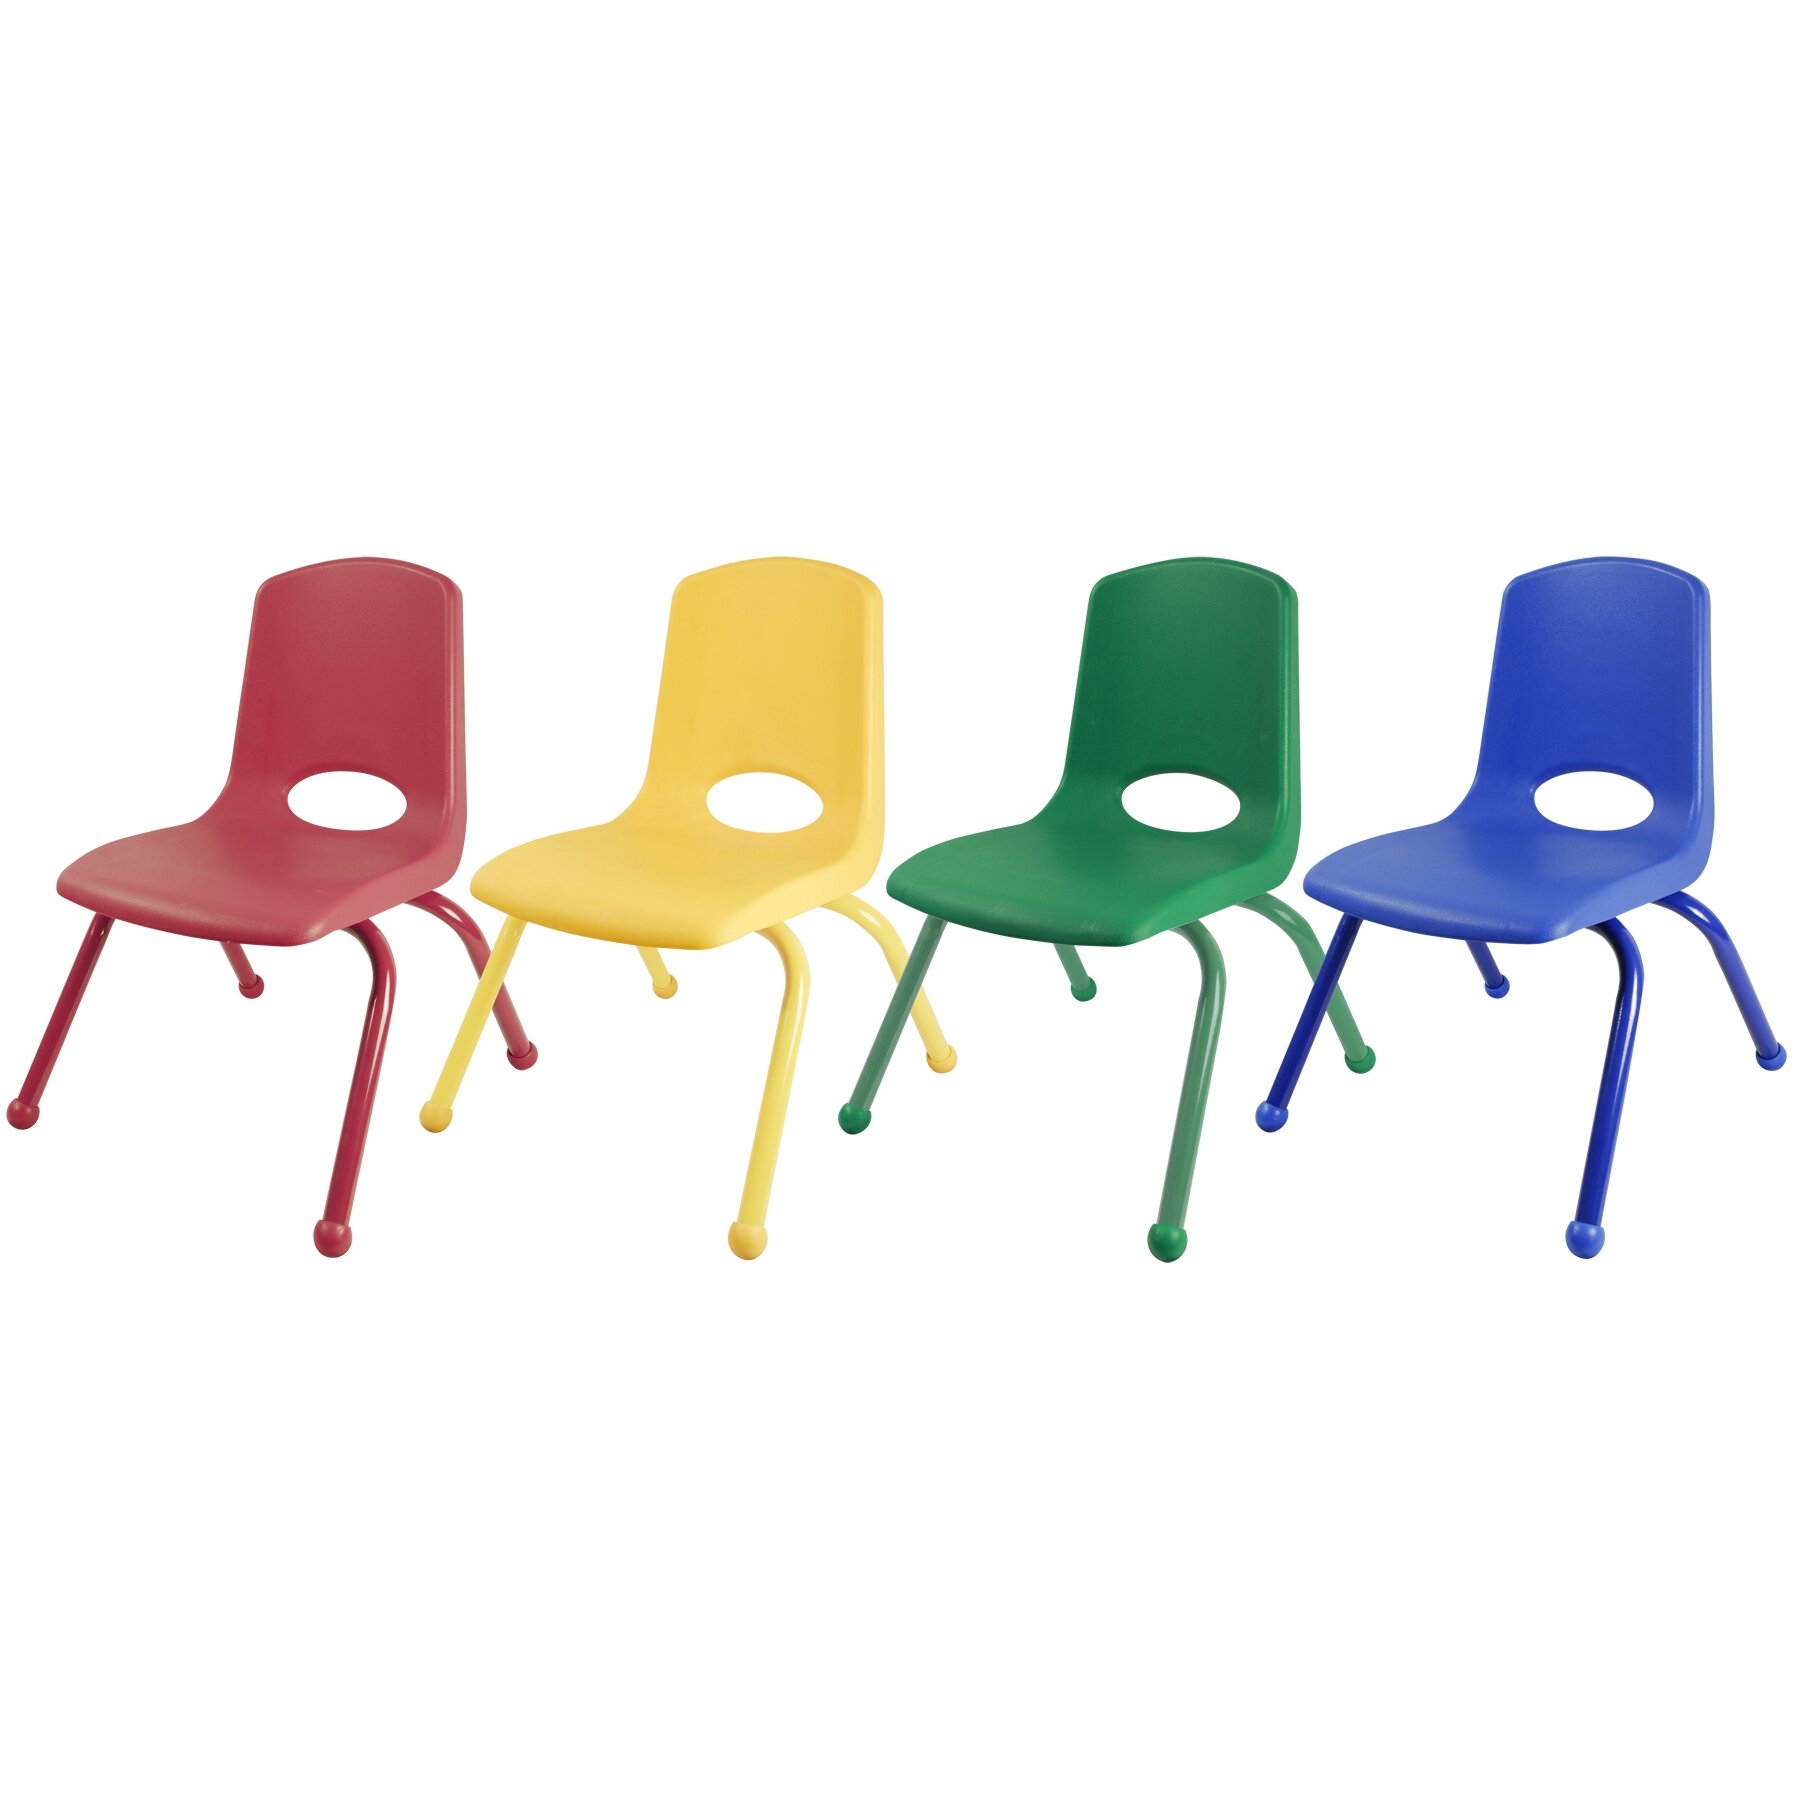 12" Plastic Classroom Stackable Chair Seat Color: Yellow, Foot Type: Ball Glide, Leg Color: Chrome